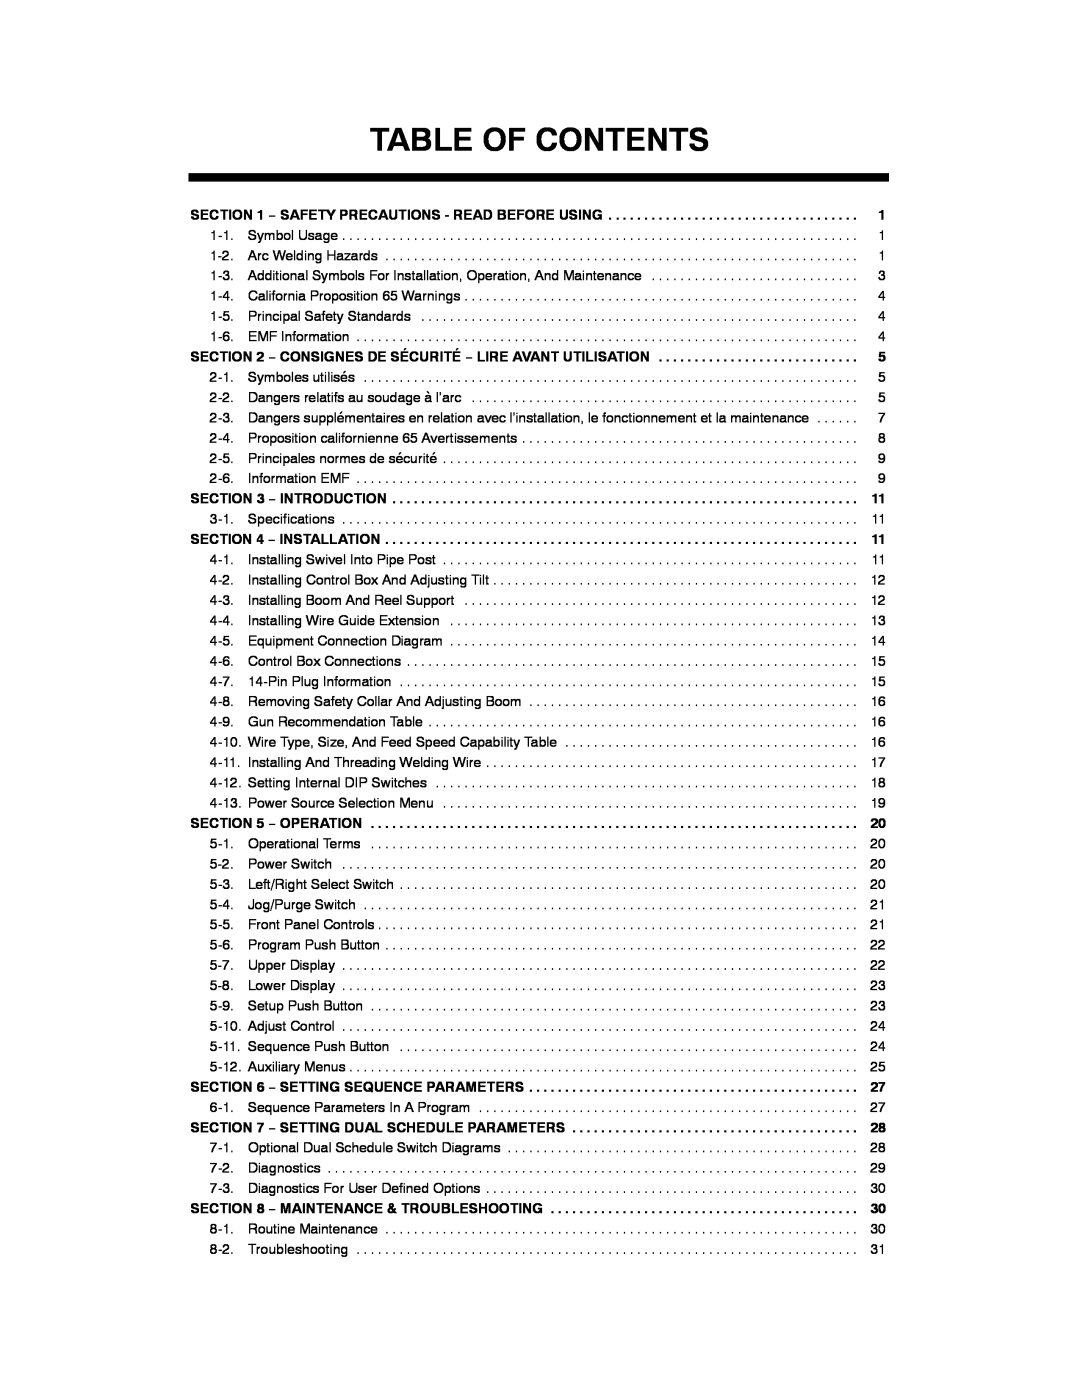 Miller Electric and DS-74DX16, DS-74DX12 manual Table Of Contents, Setting Sequence Parameters 